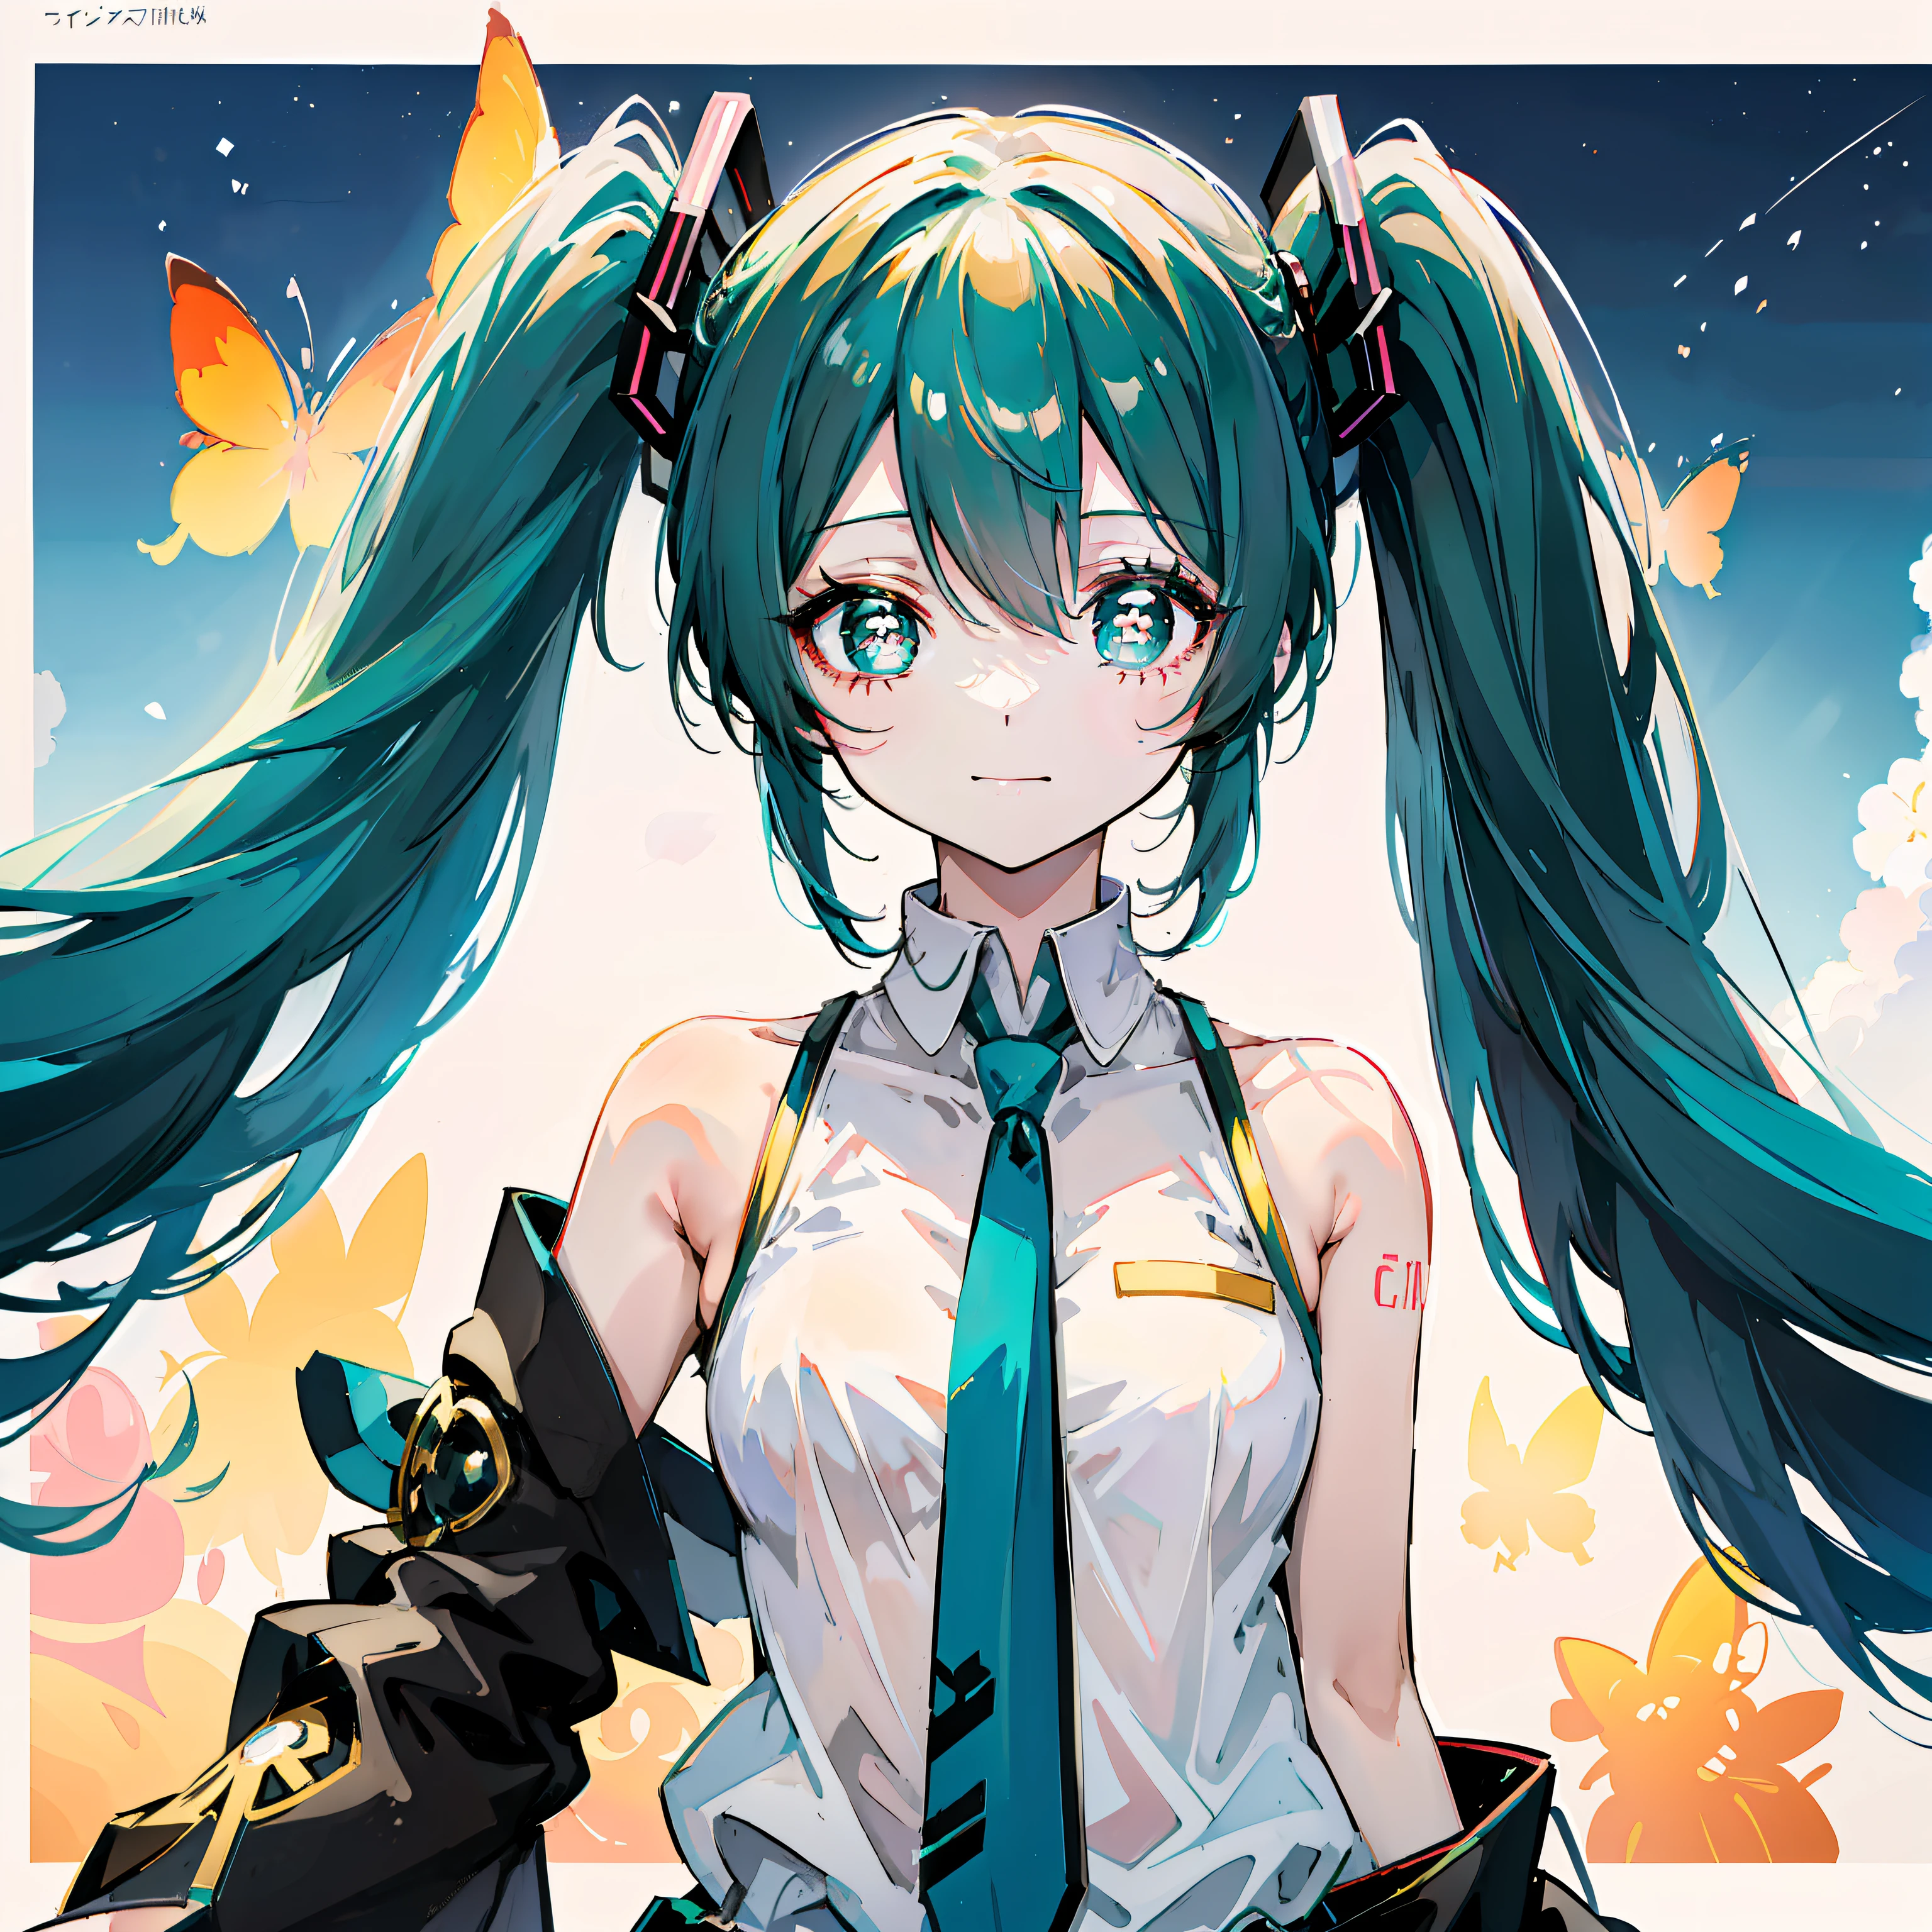 anime girl with long blue hair and a white shirt and black skirt, Hatsune Miku, Portrait of Hatsune Miku, Hatsune Miku short hair, vocaloid, hatsune miku portrait, Os amigos, mikudayo, Anime girl with teal hair, Hatsune Miku cosplay, hatsune miku face, style of anime4 K, An anime girl, attractive anime girls